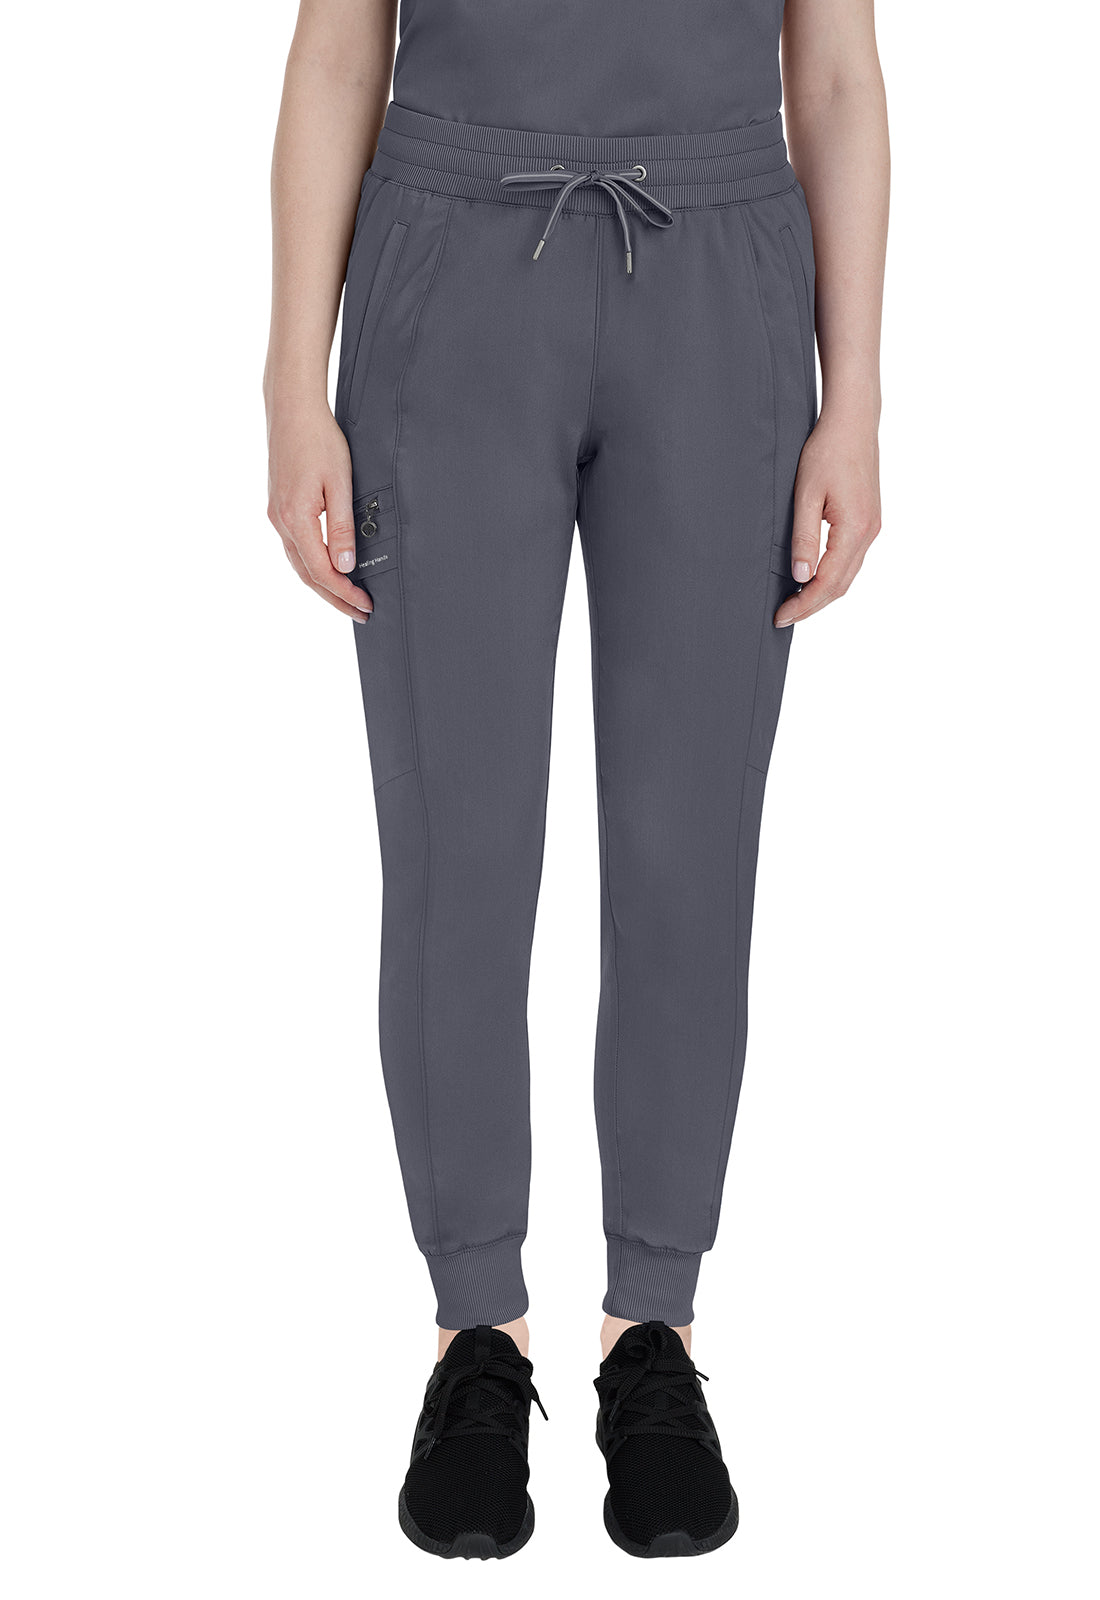 Healing Hands Purple Label Yoga 9244 Toby Jogger Pant Pewter